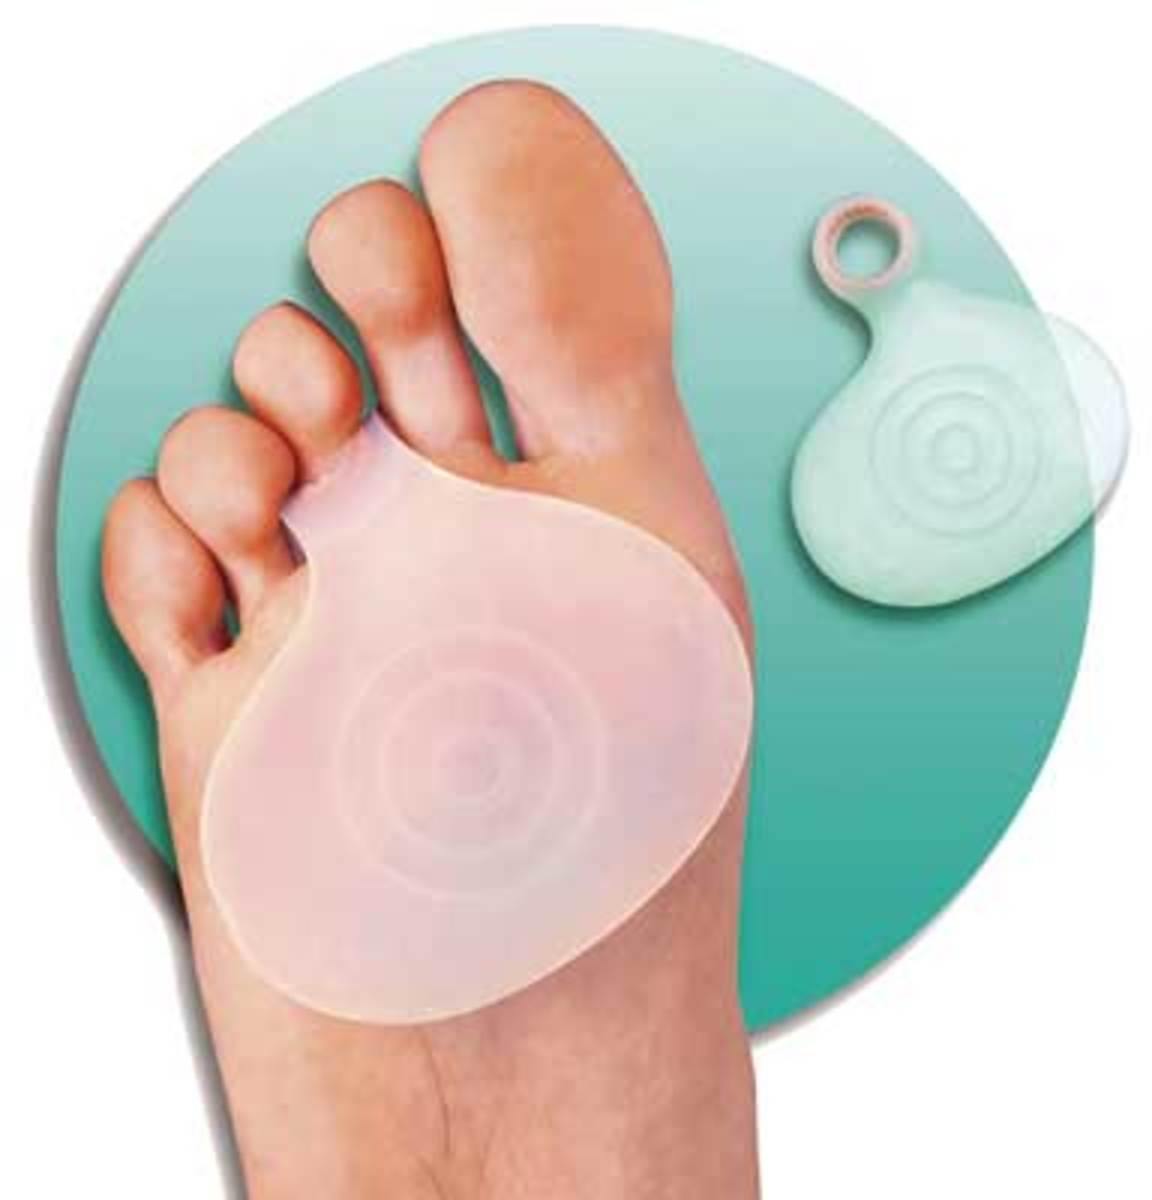 Simple first device to spread the toes and relieve the pressure on the nerve